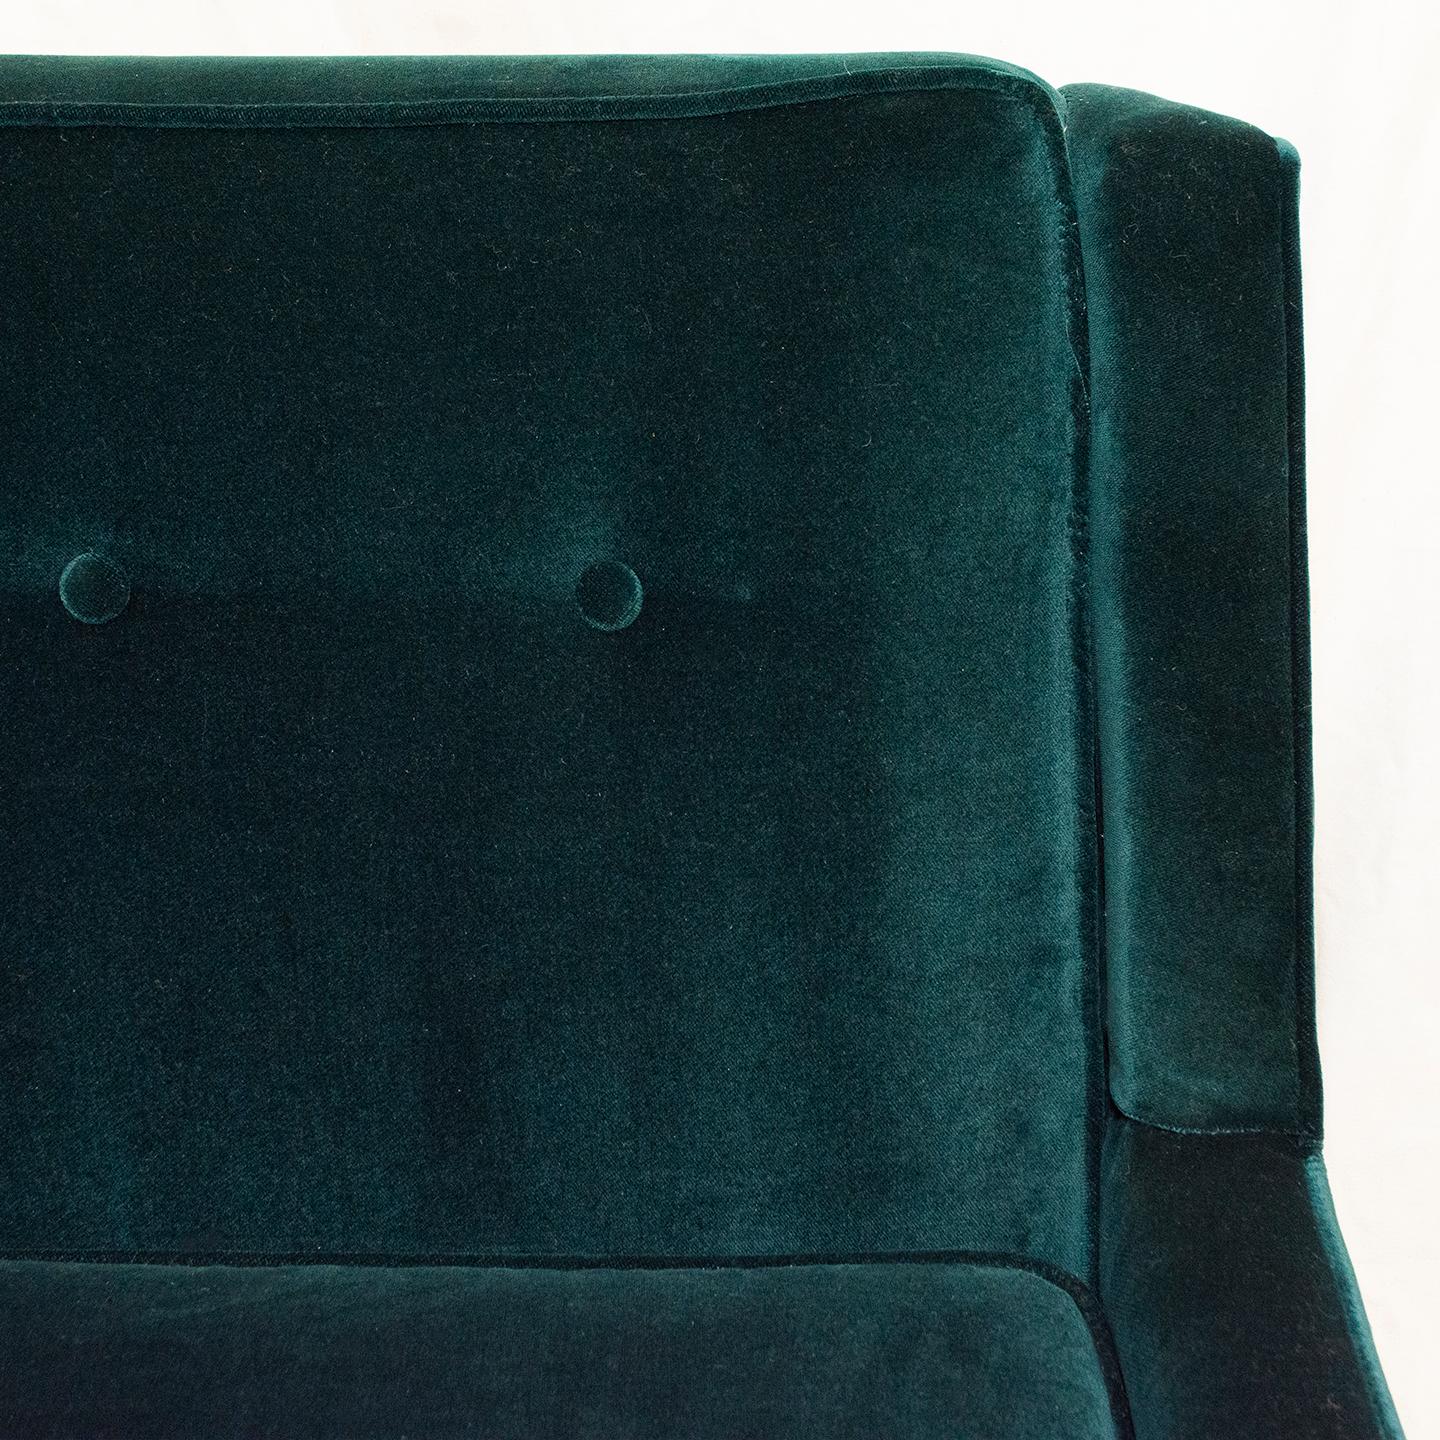 This 1960s Knoll Era sofa in stunning Emerald Green Performance Velvet is rich in color and texture. With a broad, geometric structure, the sofa is a beautiful representation of Classic Mid-Century Modern furniture. It was manufactured in 1964 and